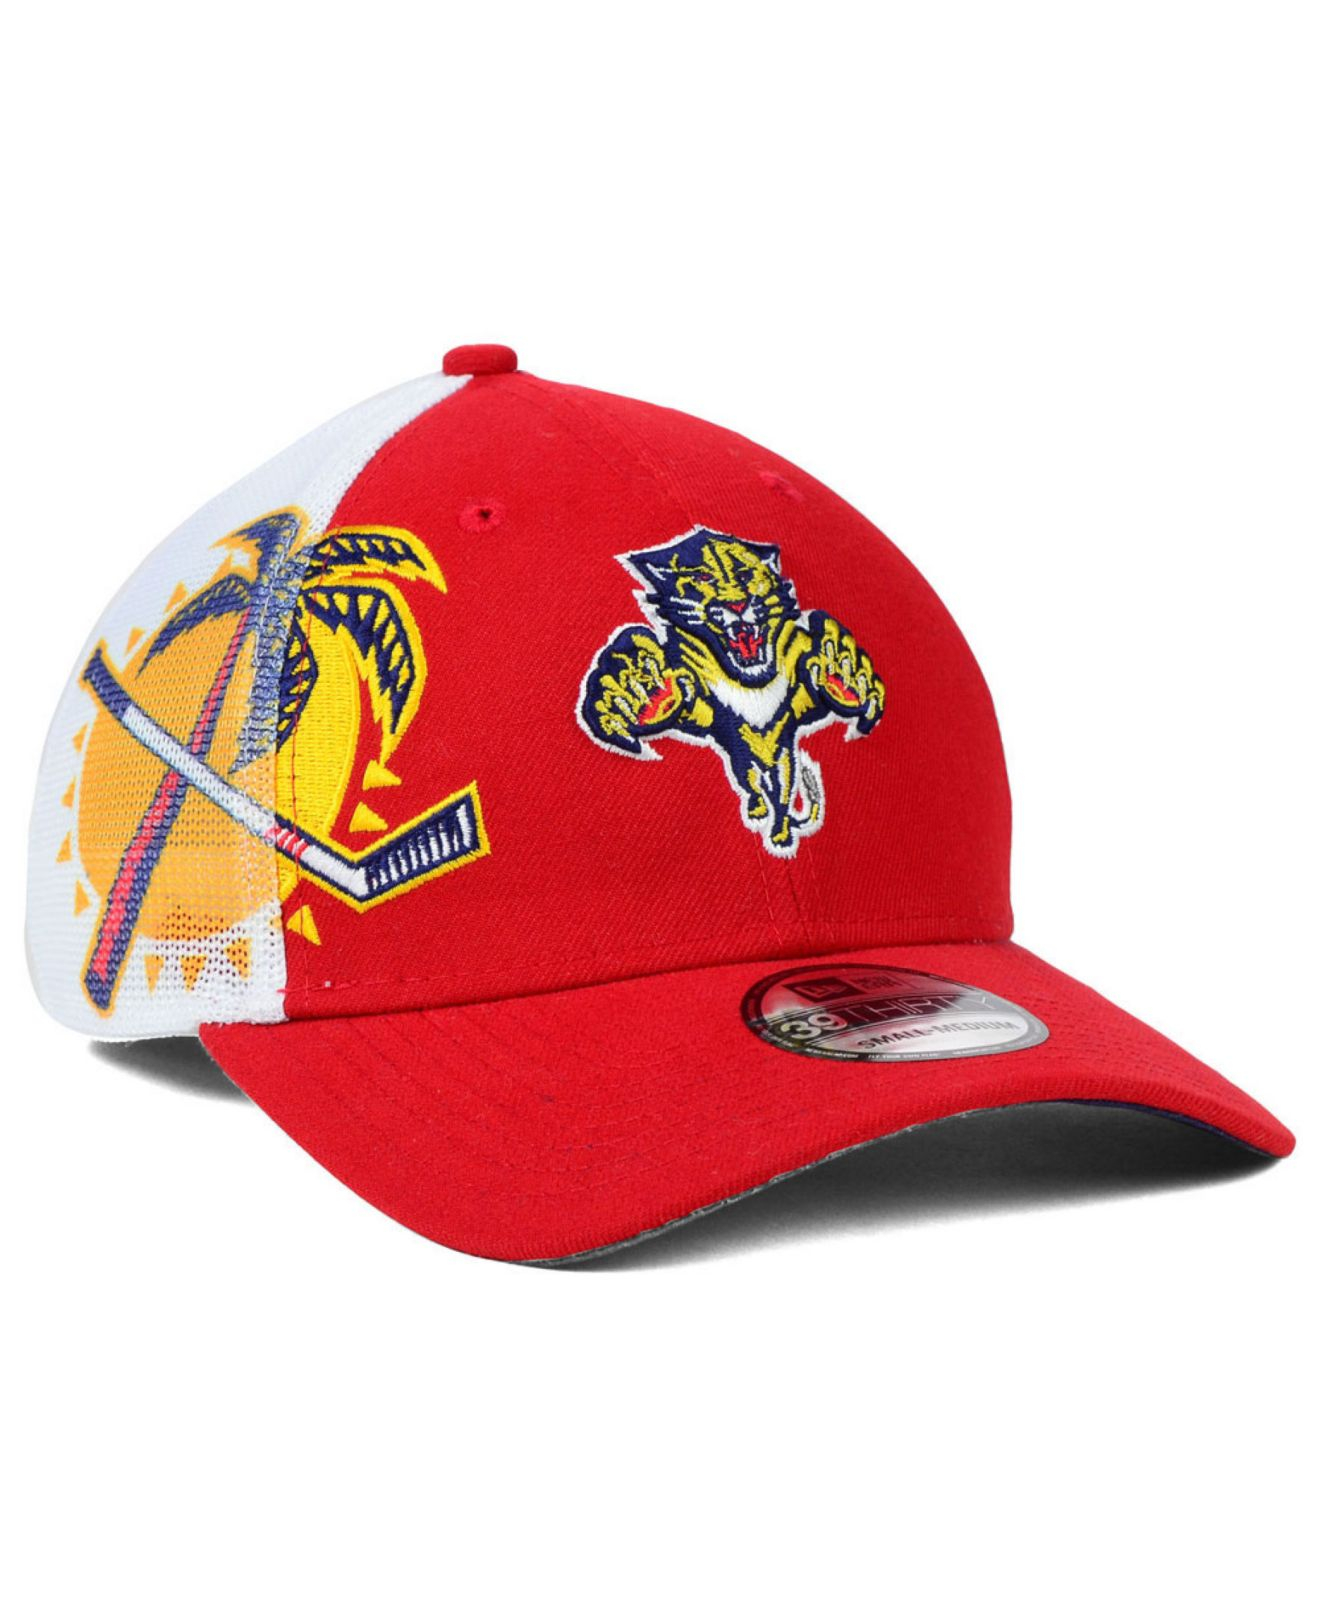 new florida panthers hat